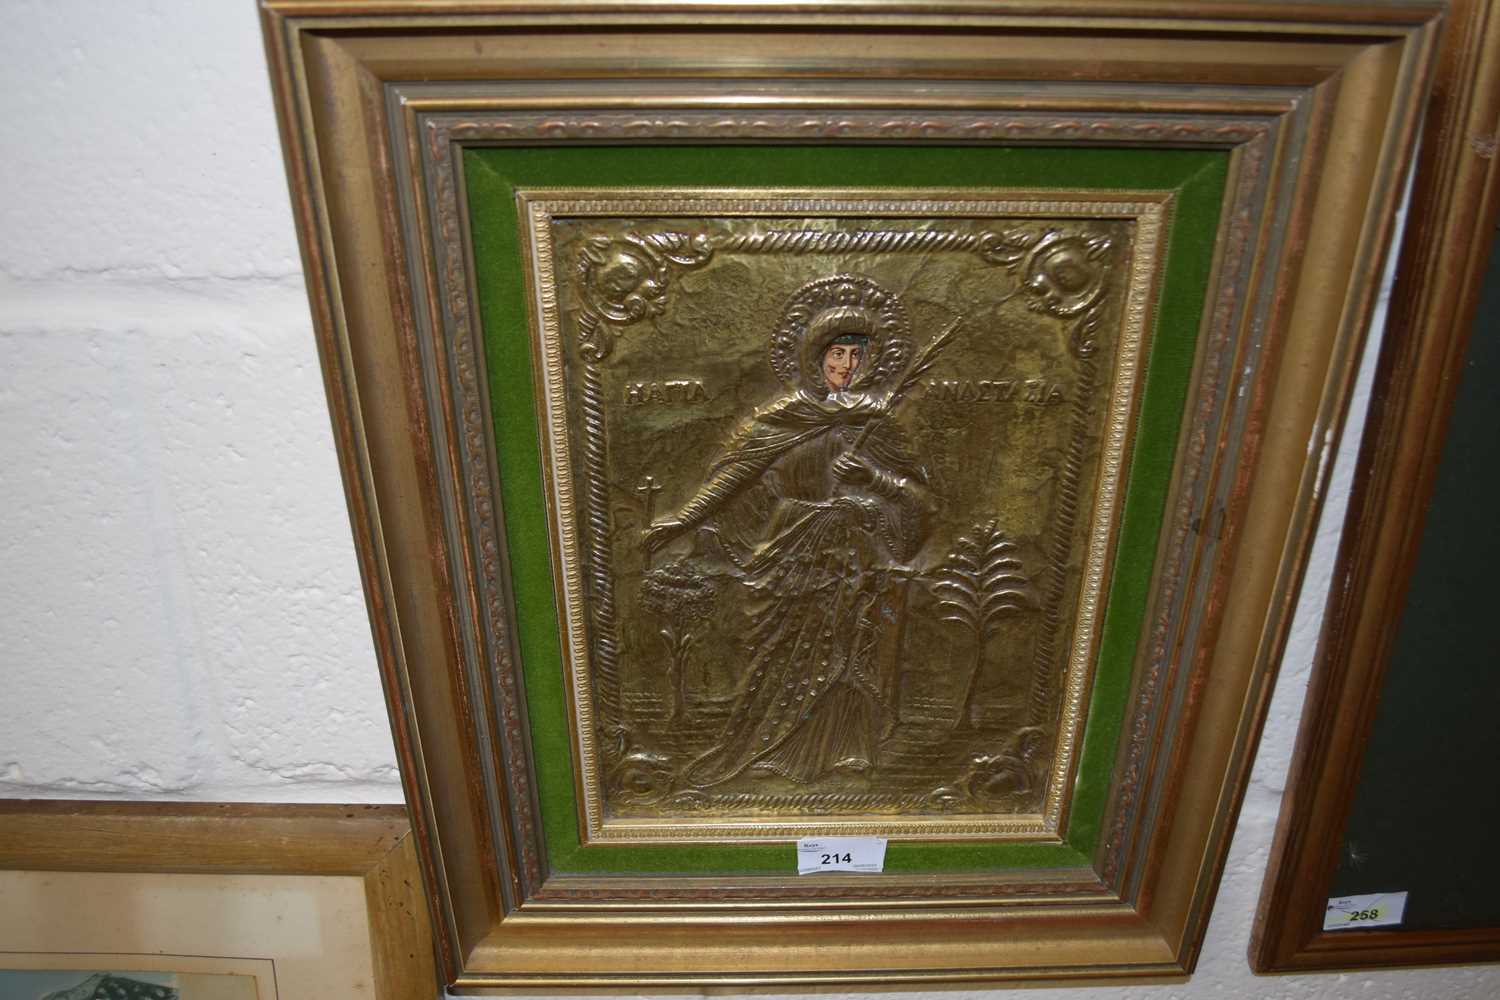 20th Century pressed brass religious icon picture set in a gilt frame